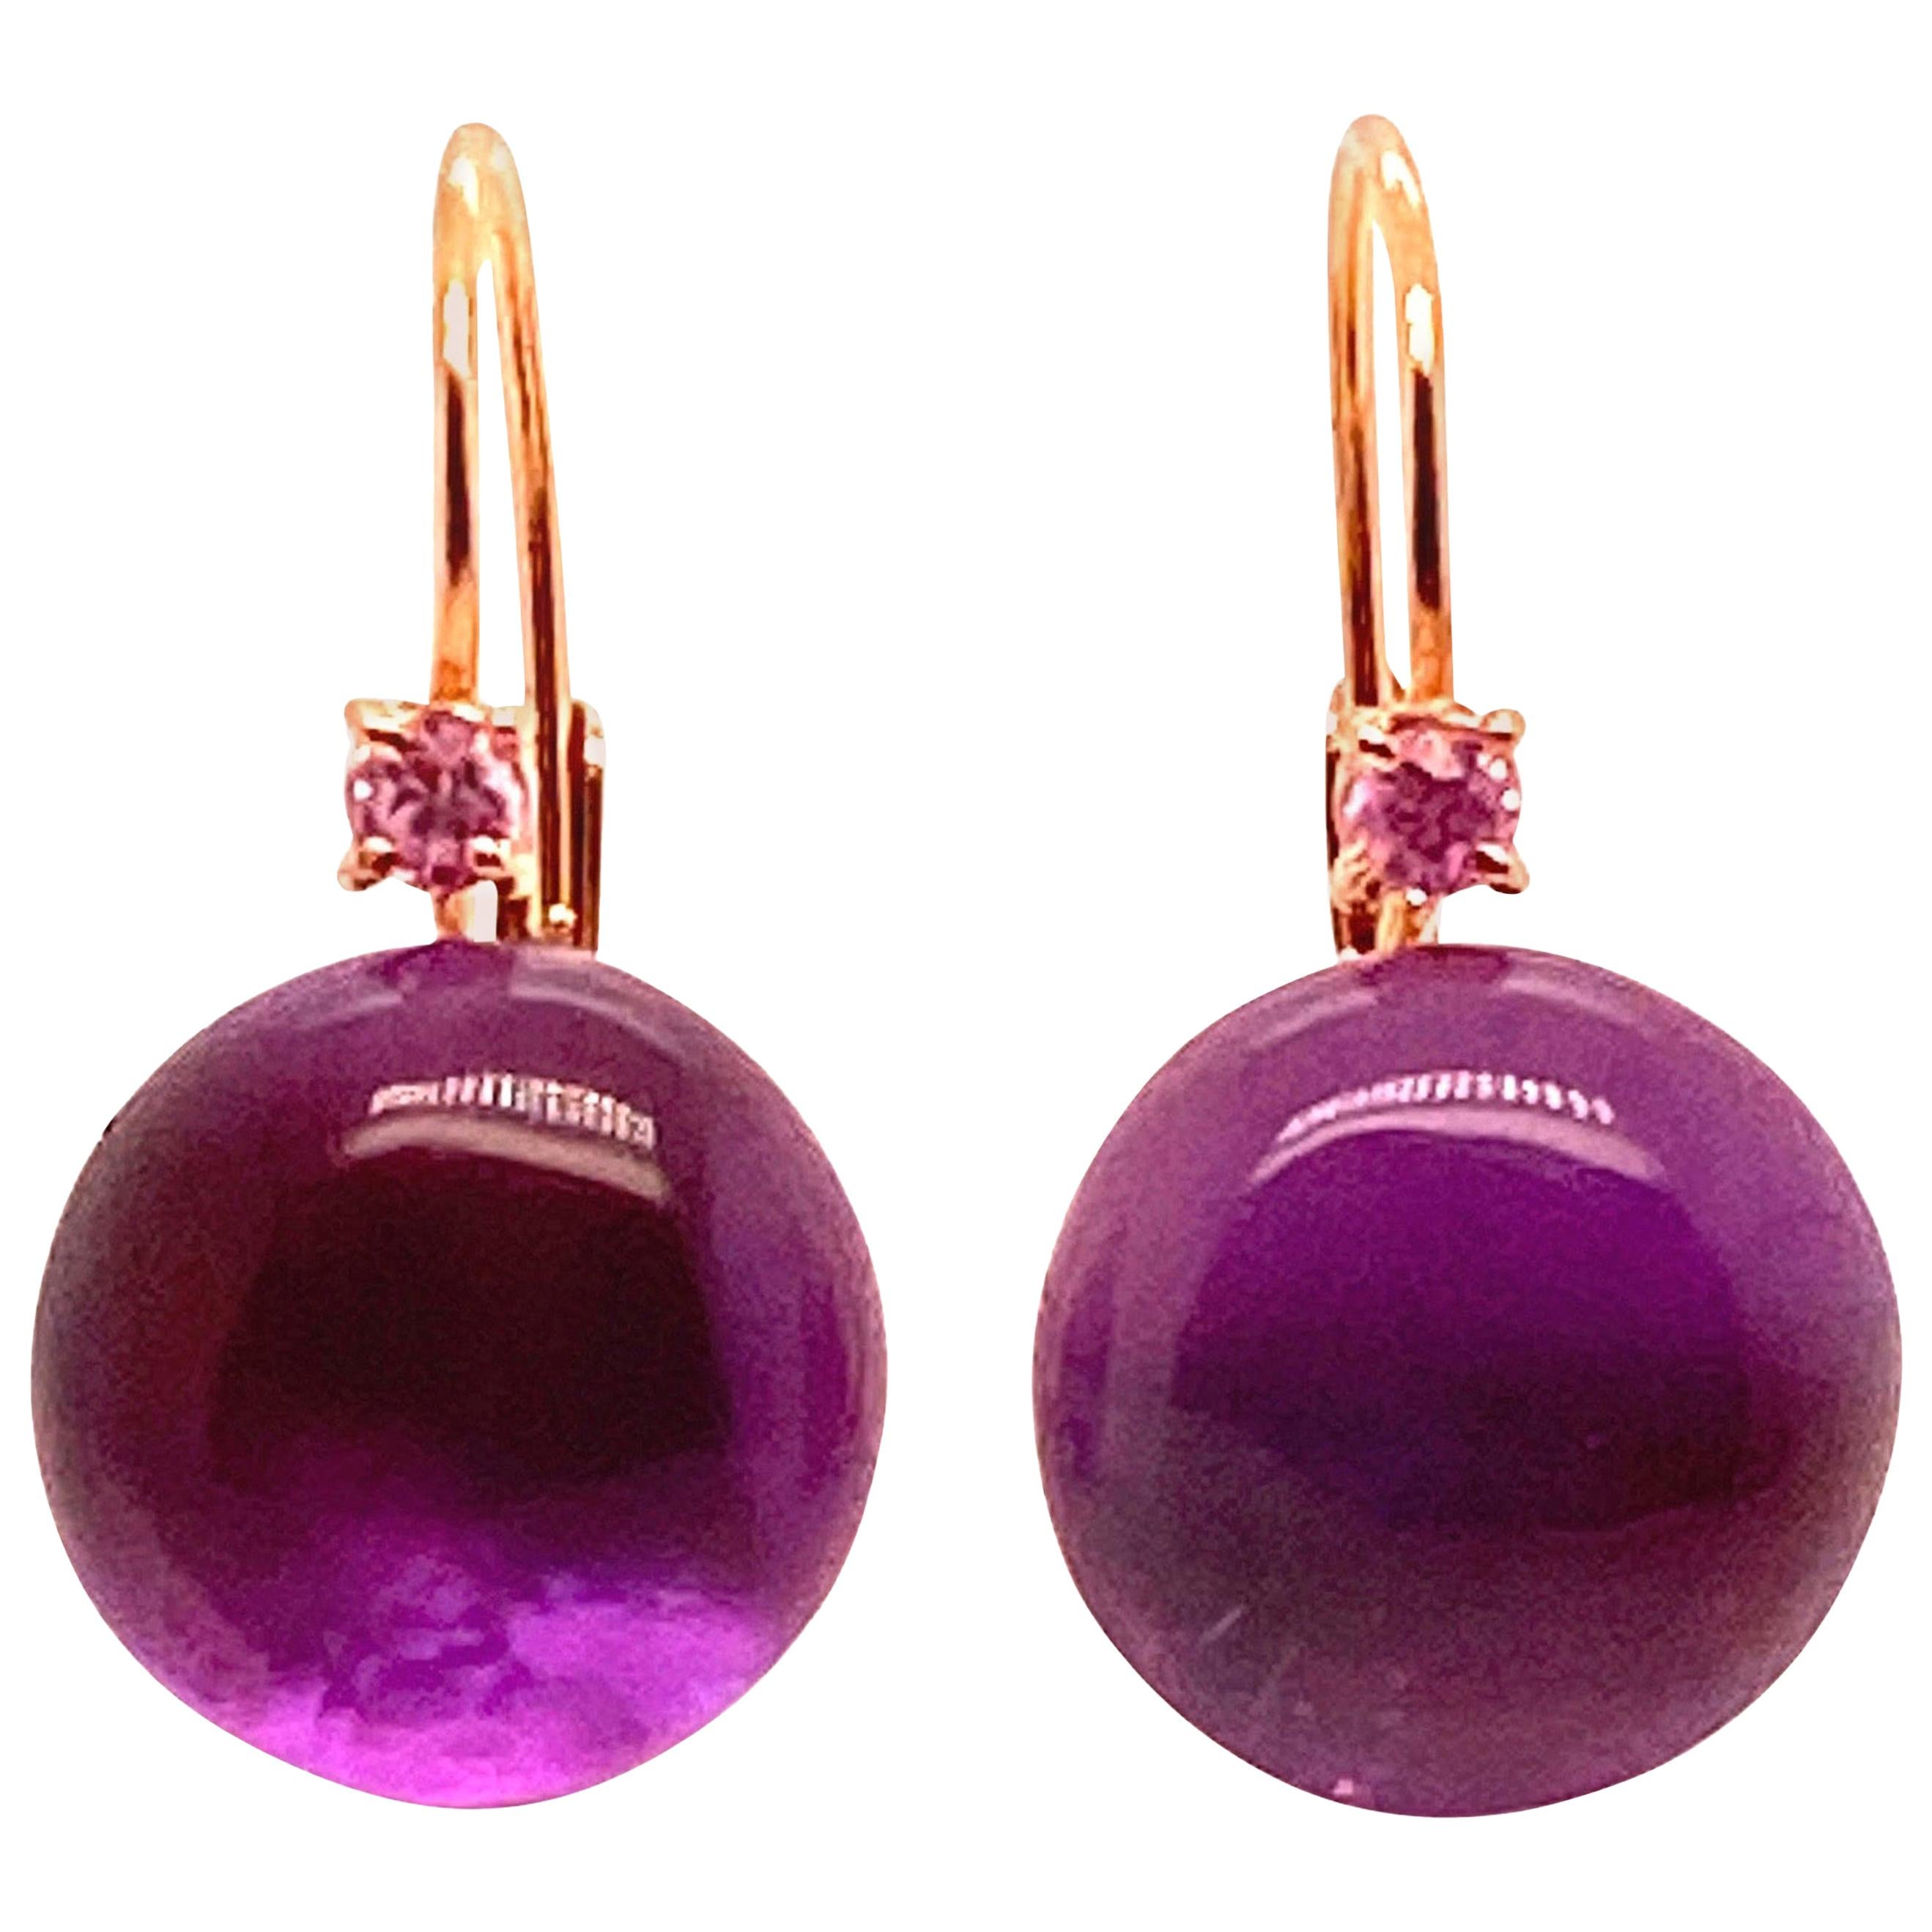 Earrings of amethyst balls overcome with pink sapphires mounted on a sleeping frame of 18 karat rose gold
2.8 grams of gold
total weight 7.7 grams for both
Hauteur 2,5 centimètre 
0.985 inch